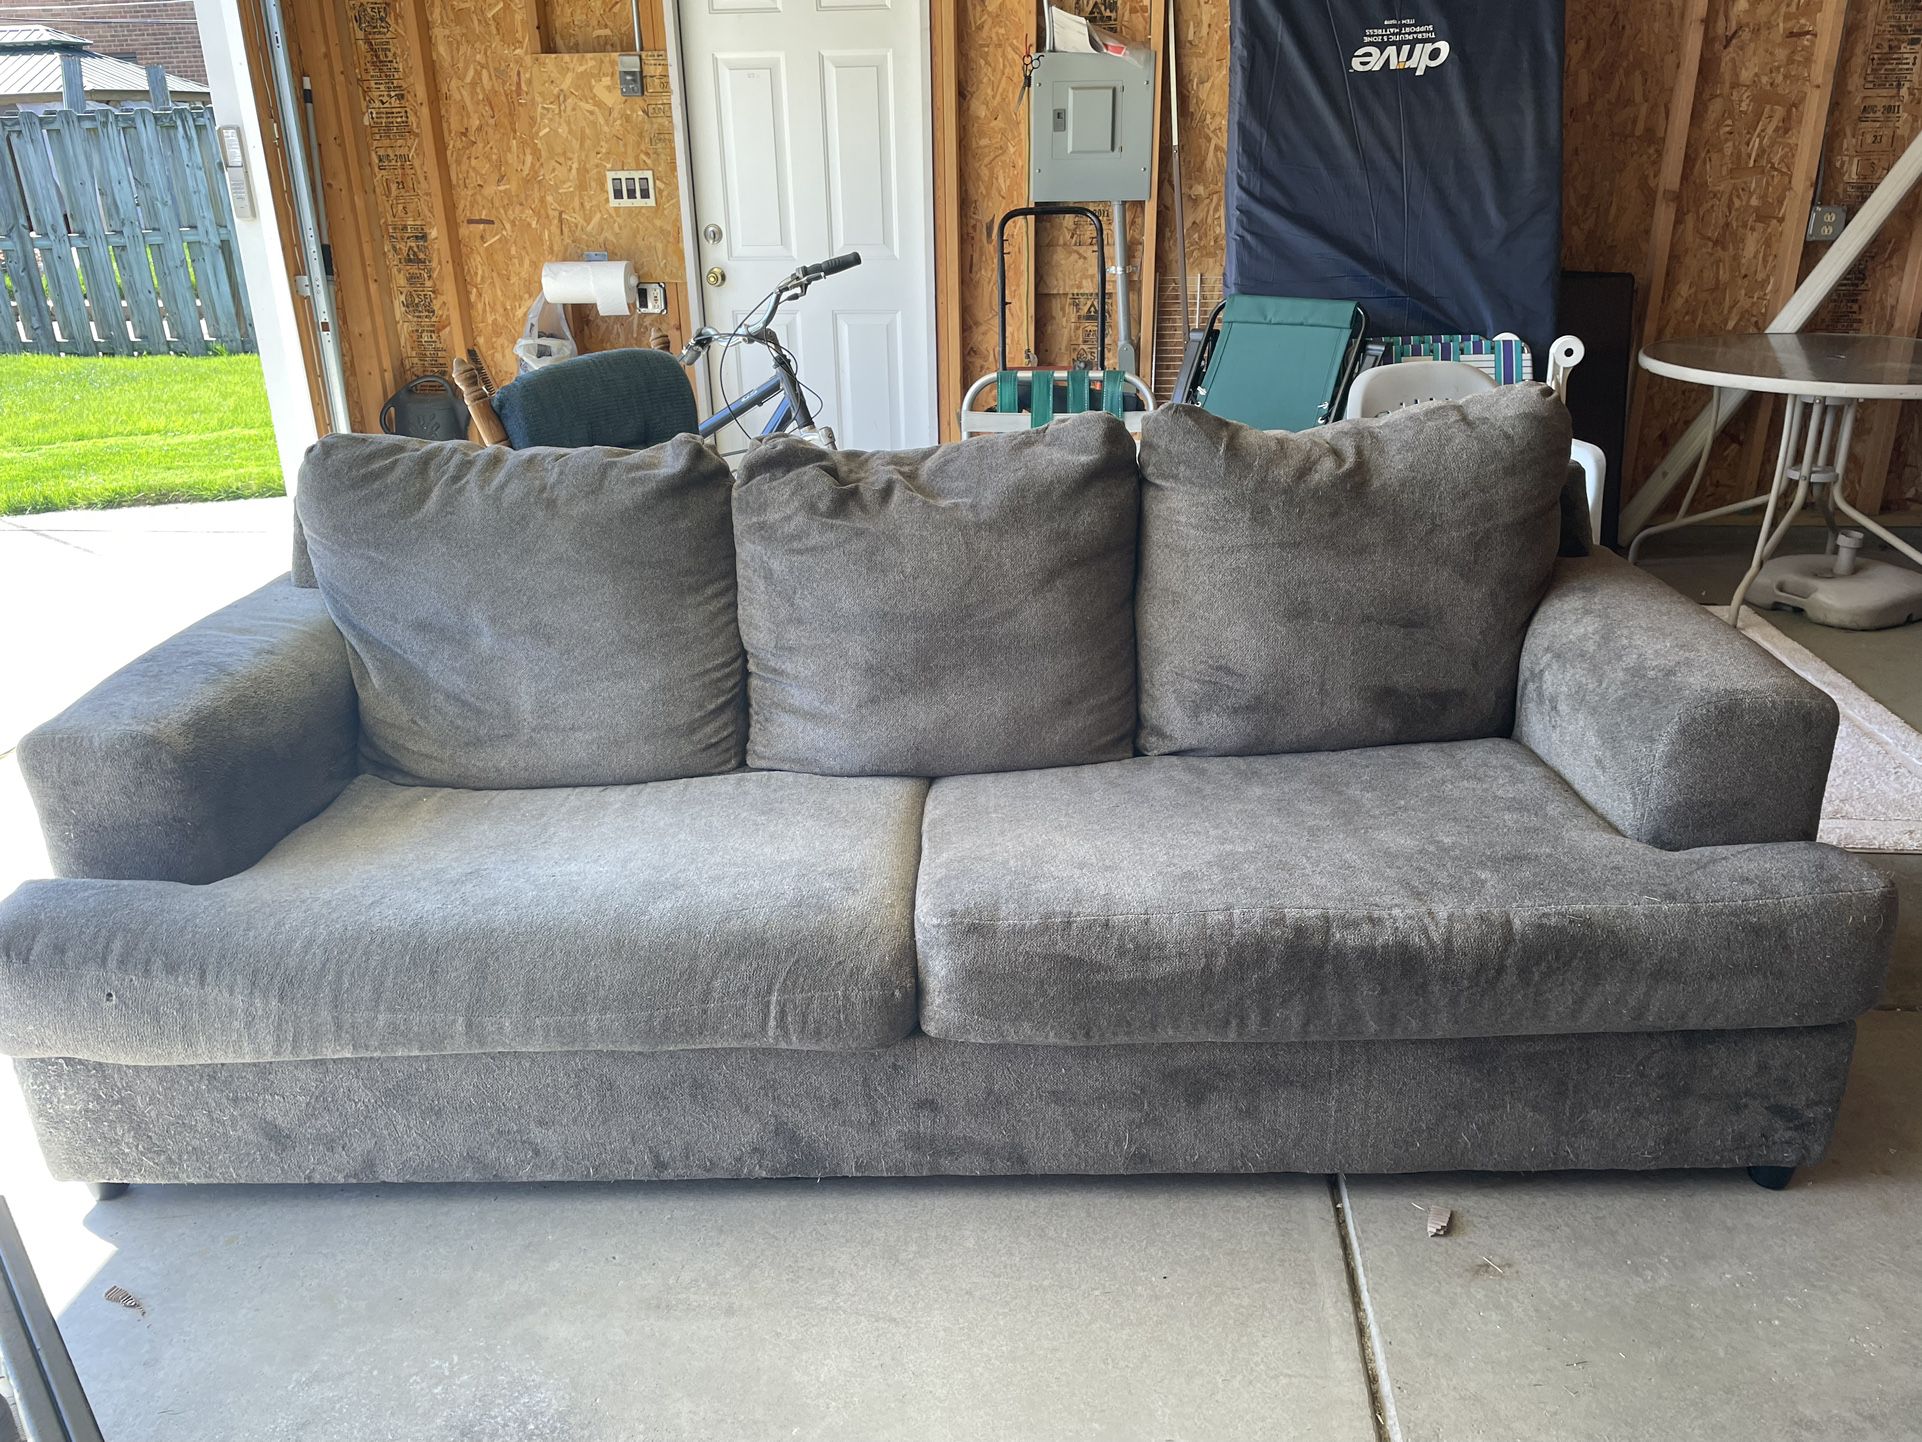 Super Comfy Large Couch 96”x42”